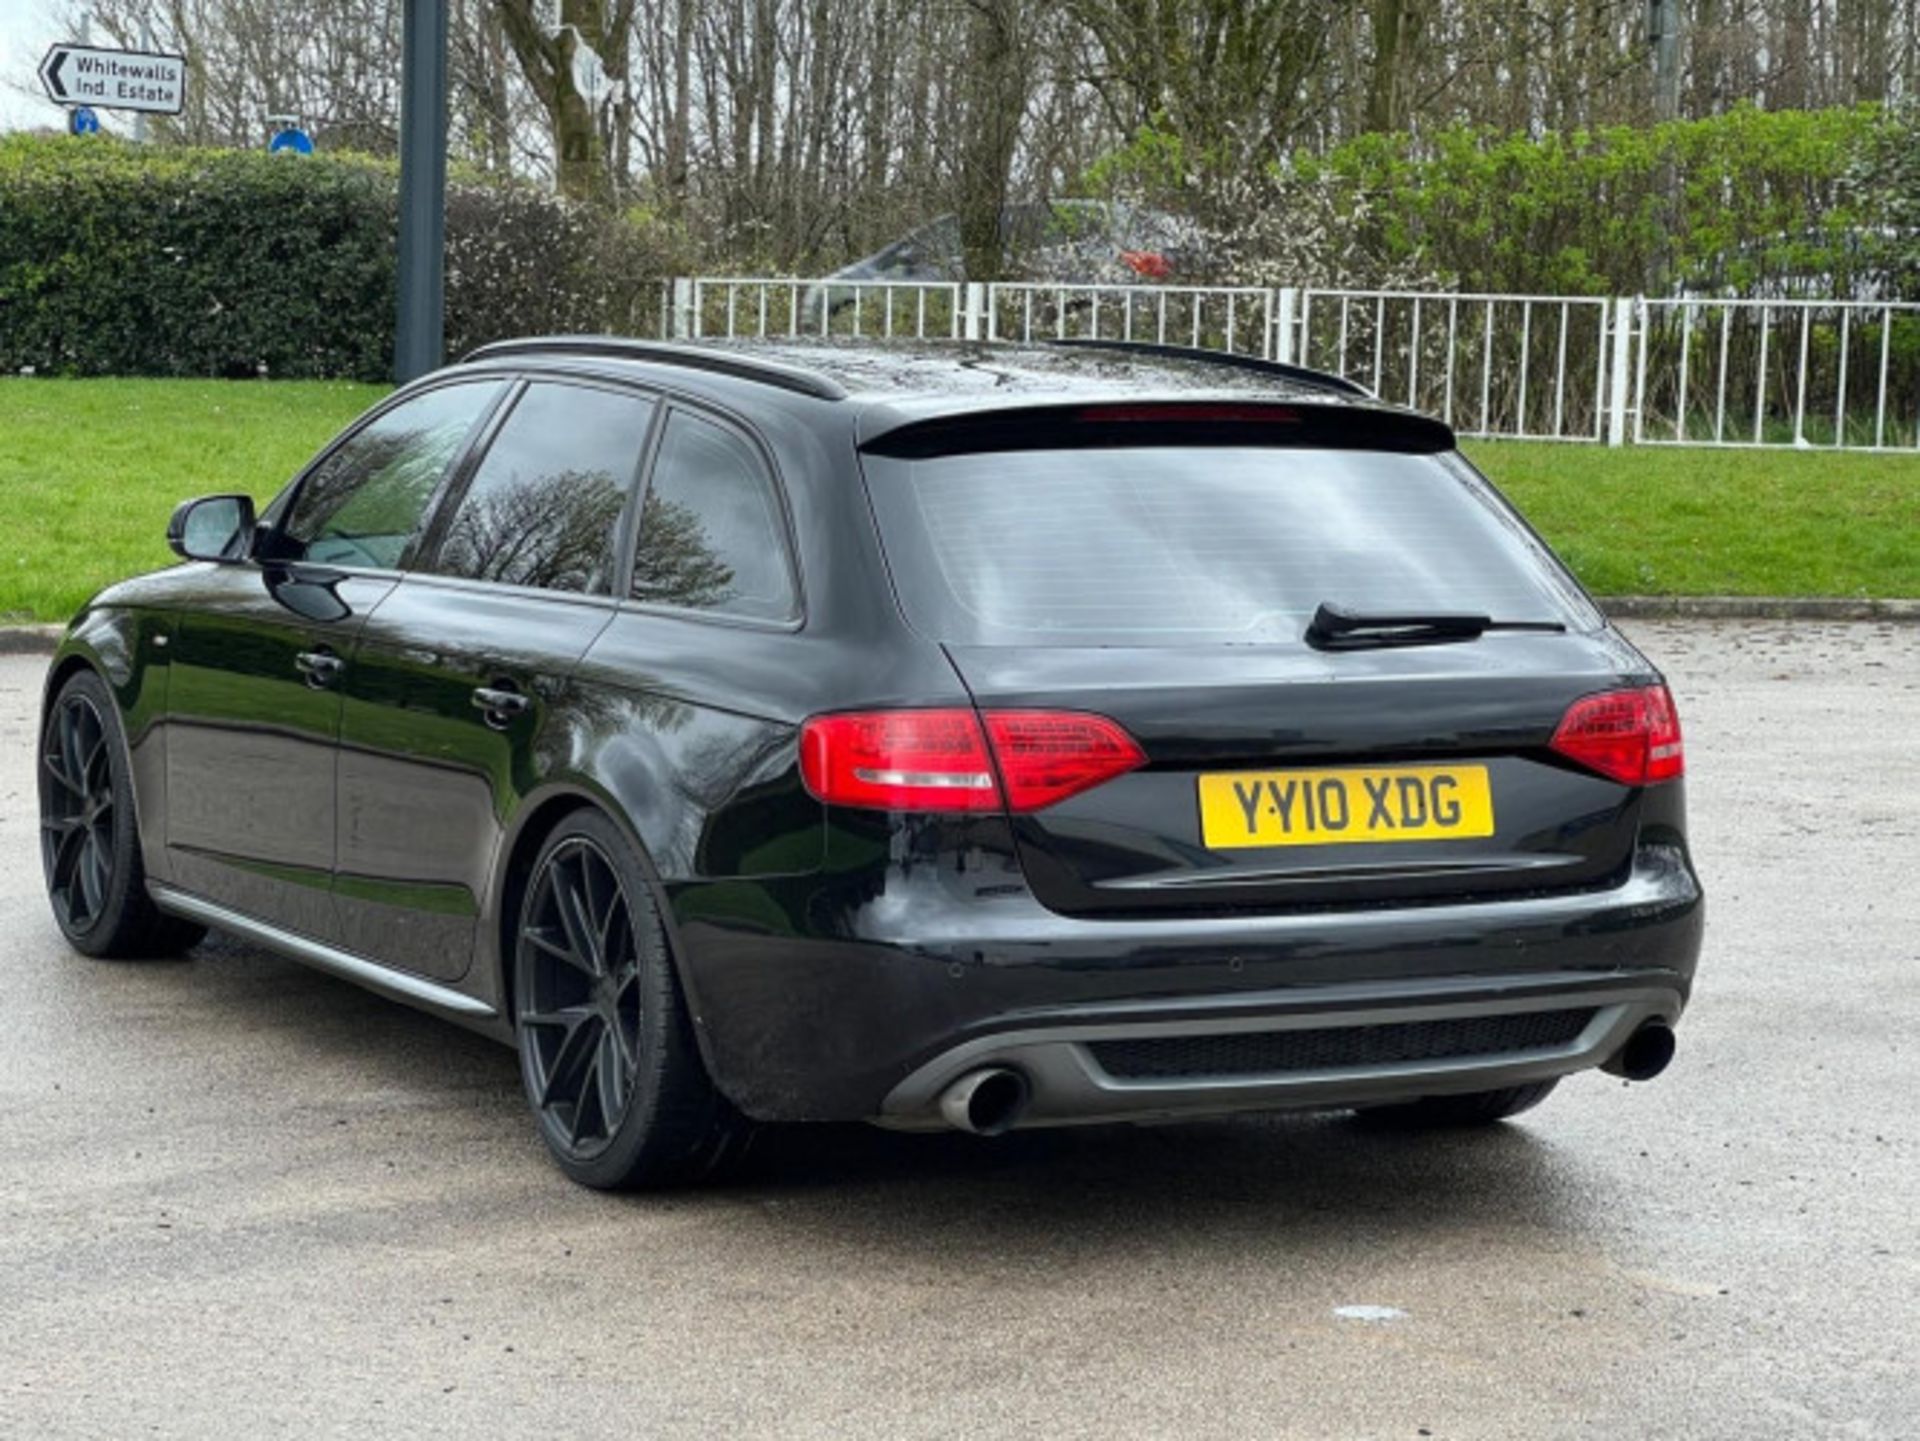 2010 AUDI A4 AVANT 2.0 TFSI S LINE SPECIAL EDITION S TRONIC QUATTRO >>--NO VAT ON HAMMER--<< - Image 103 of 115